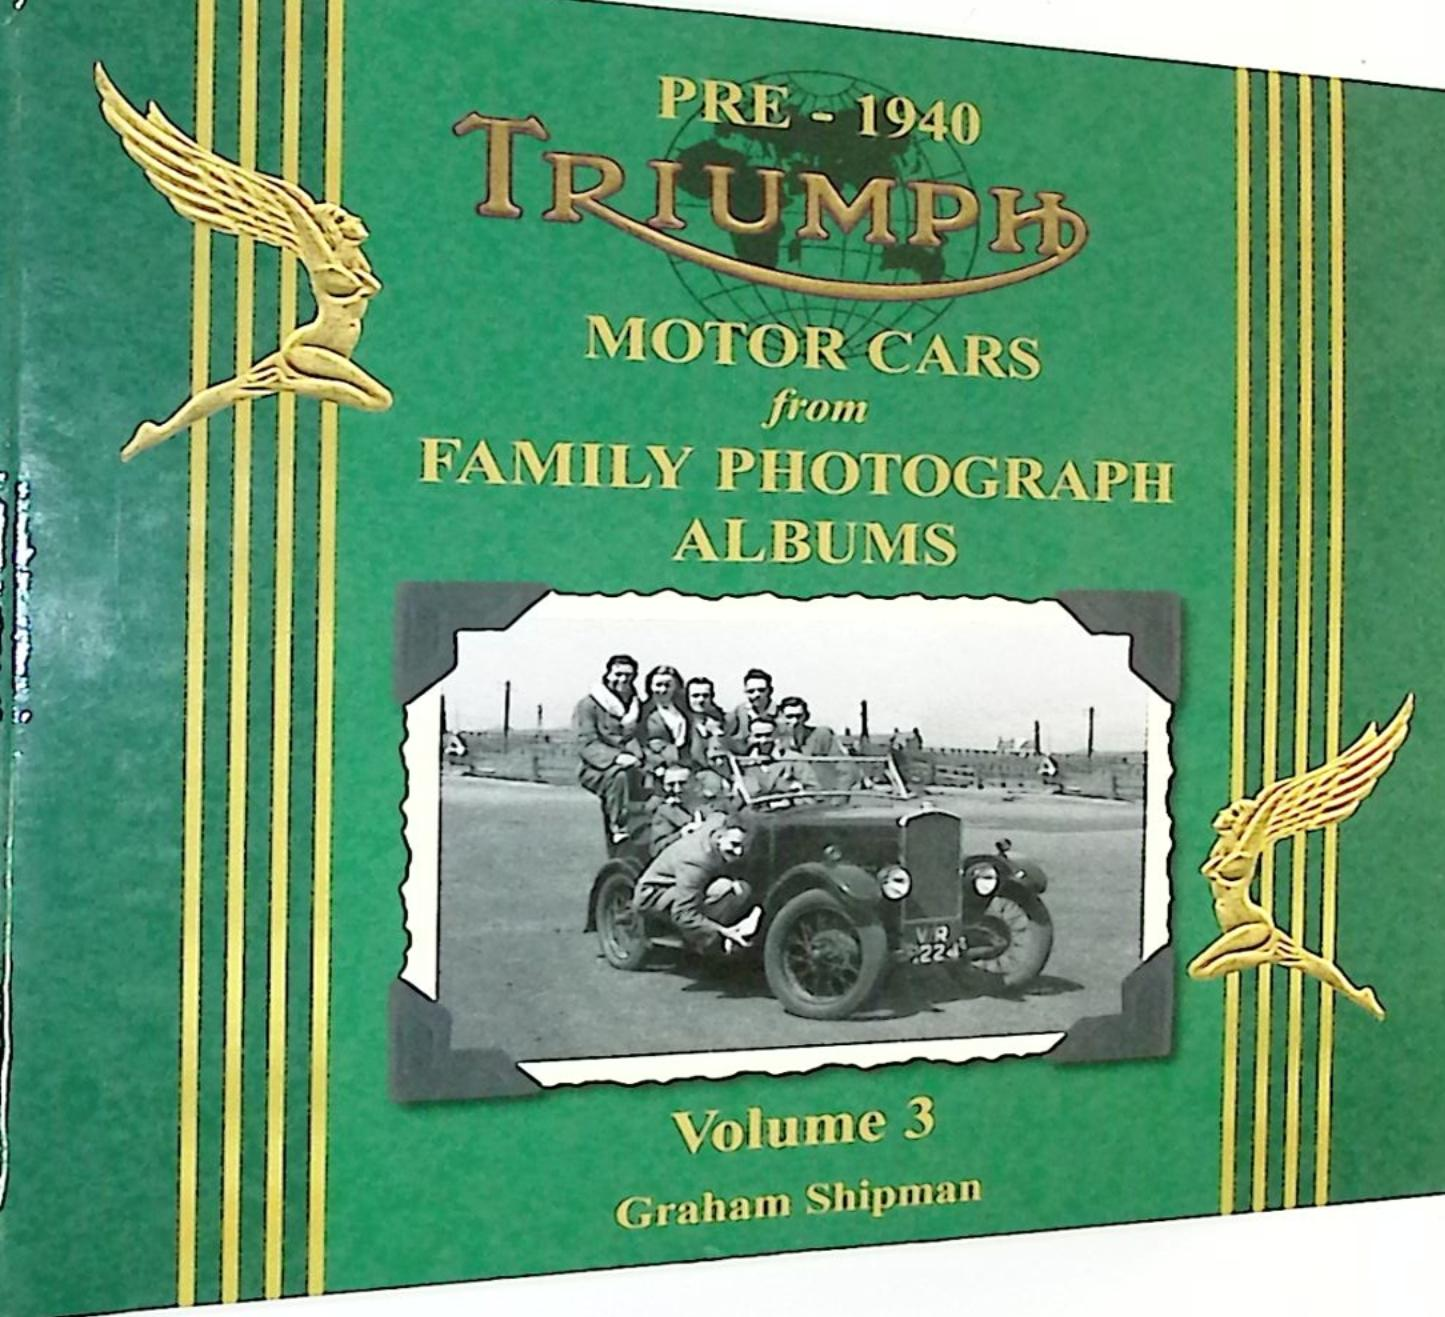 Pre-1940 Triumph Motor Cars from Family Photograph Albums. Volume 3